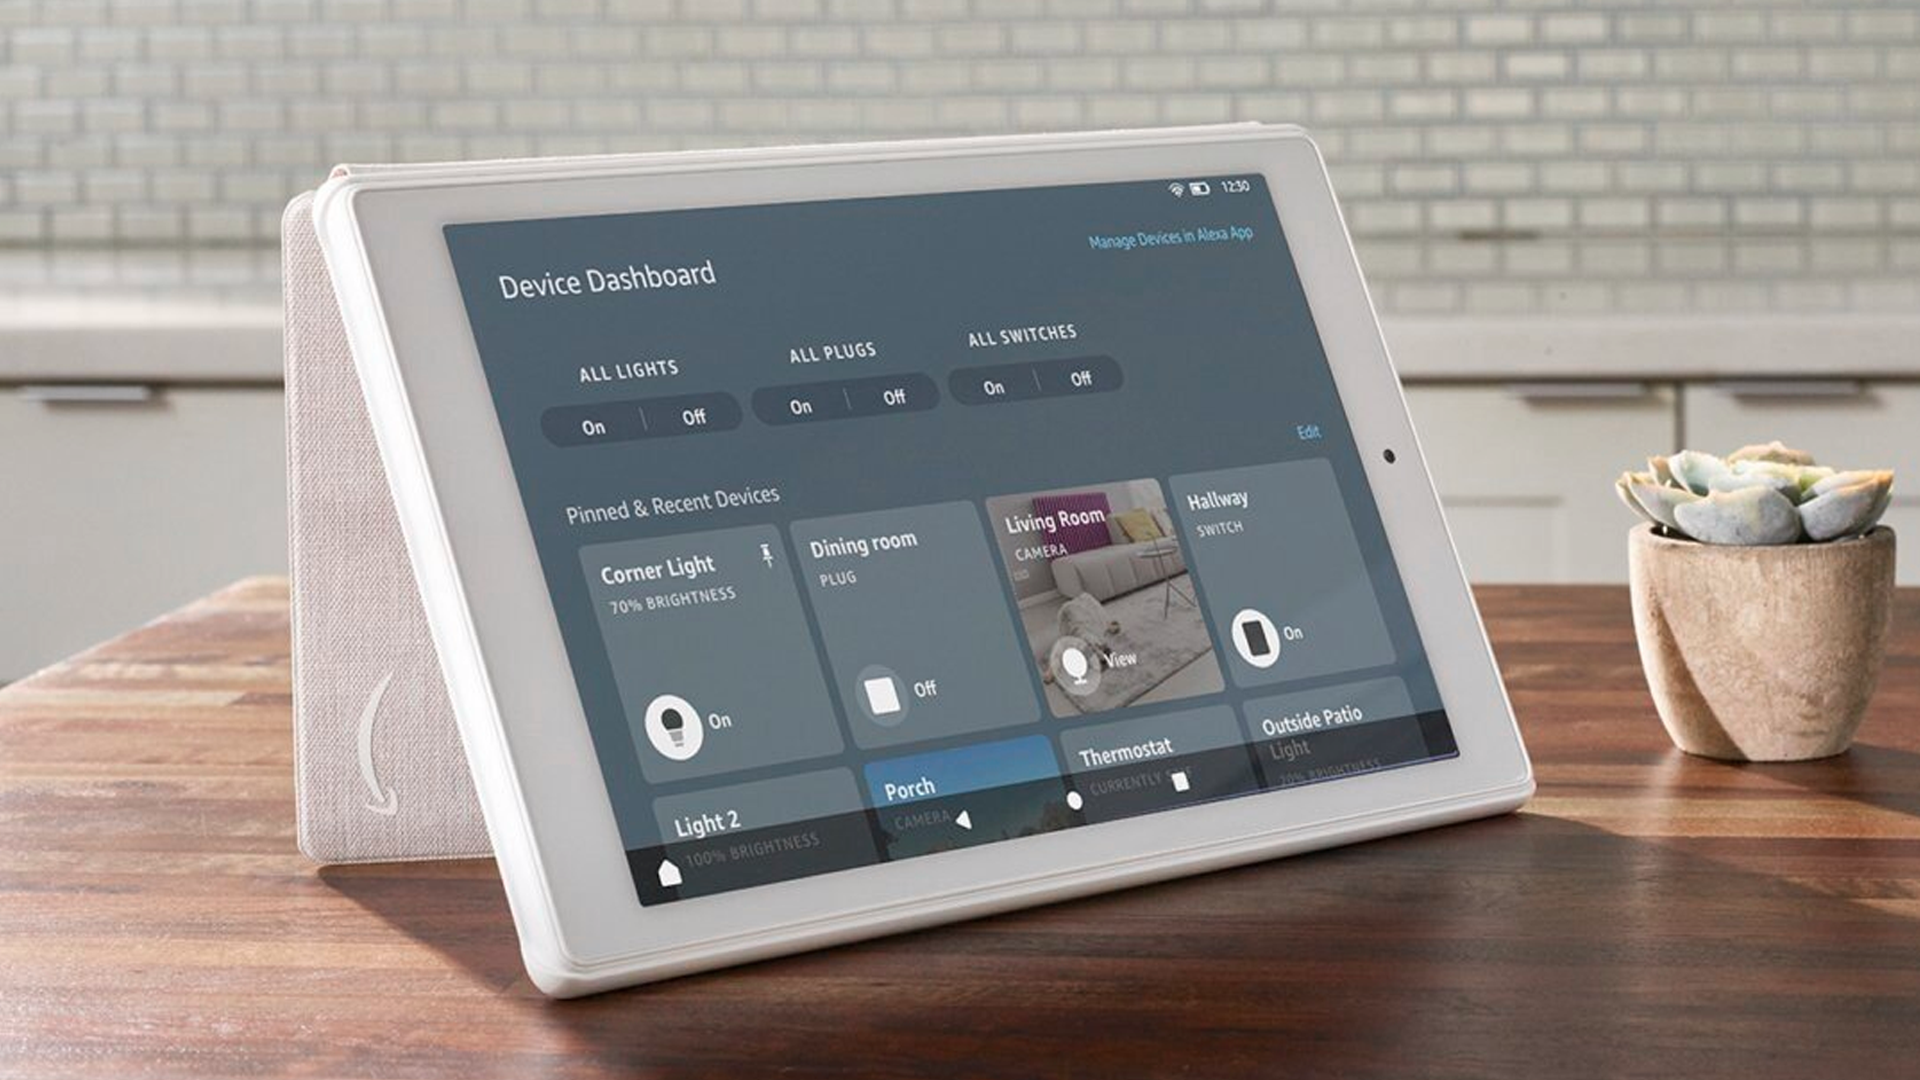 Some Amazon Fire Tablets Now Characteristic a Trim Residence Application Dashboard